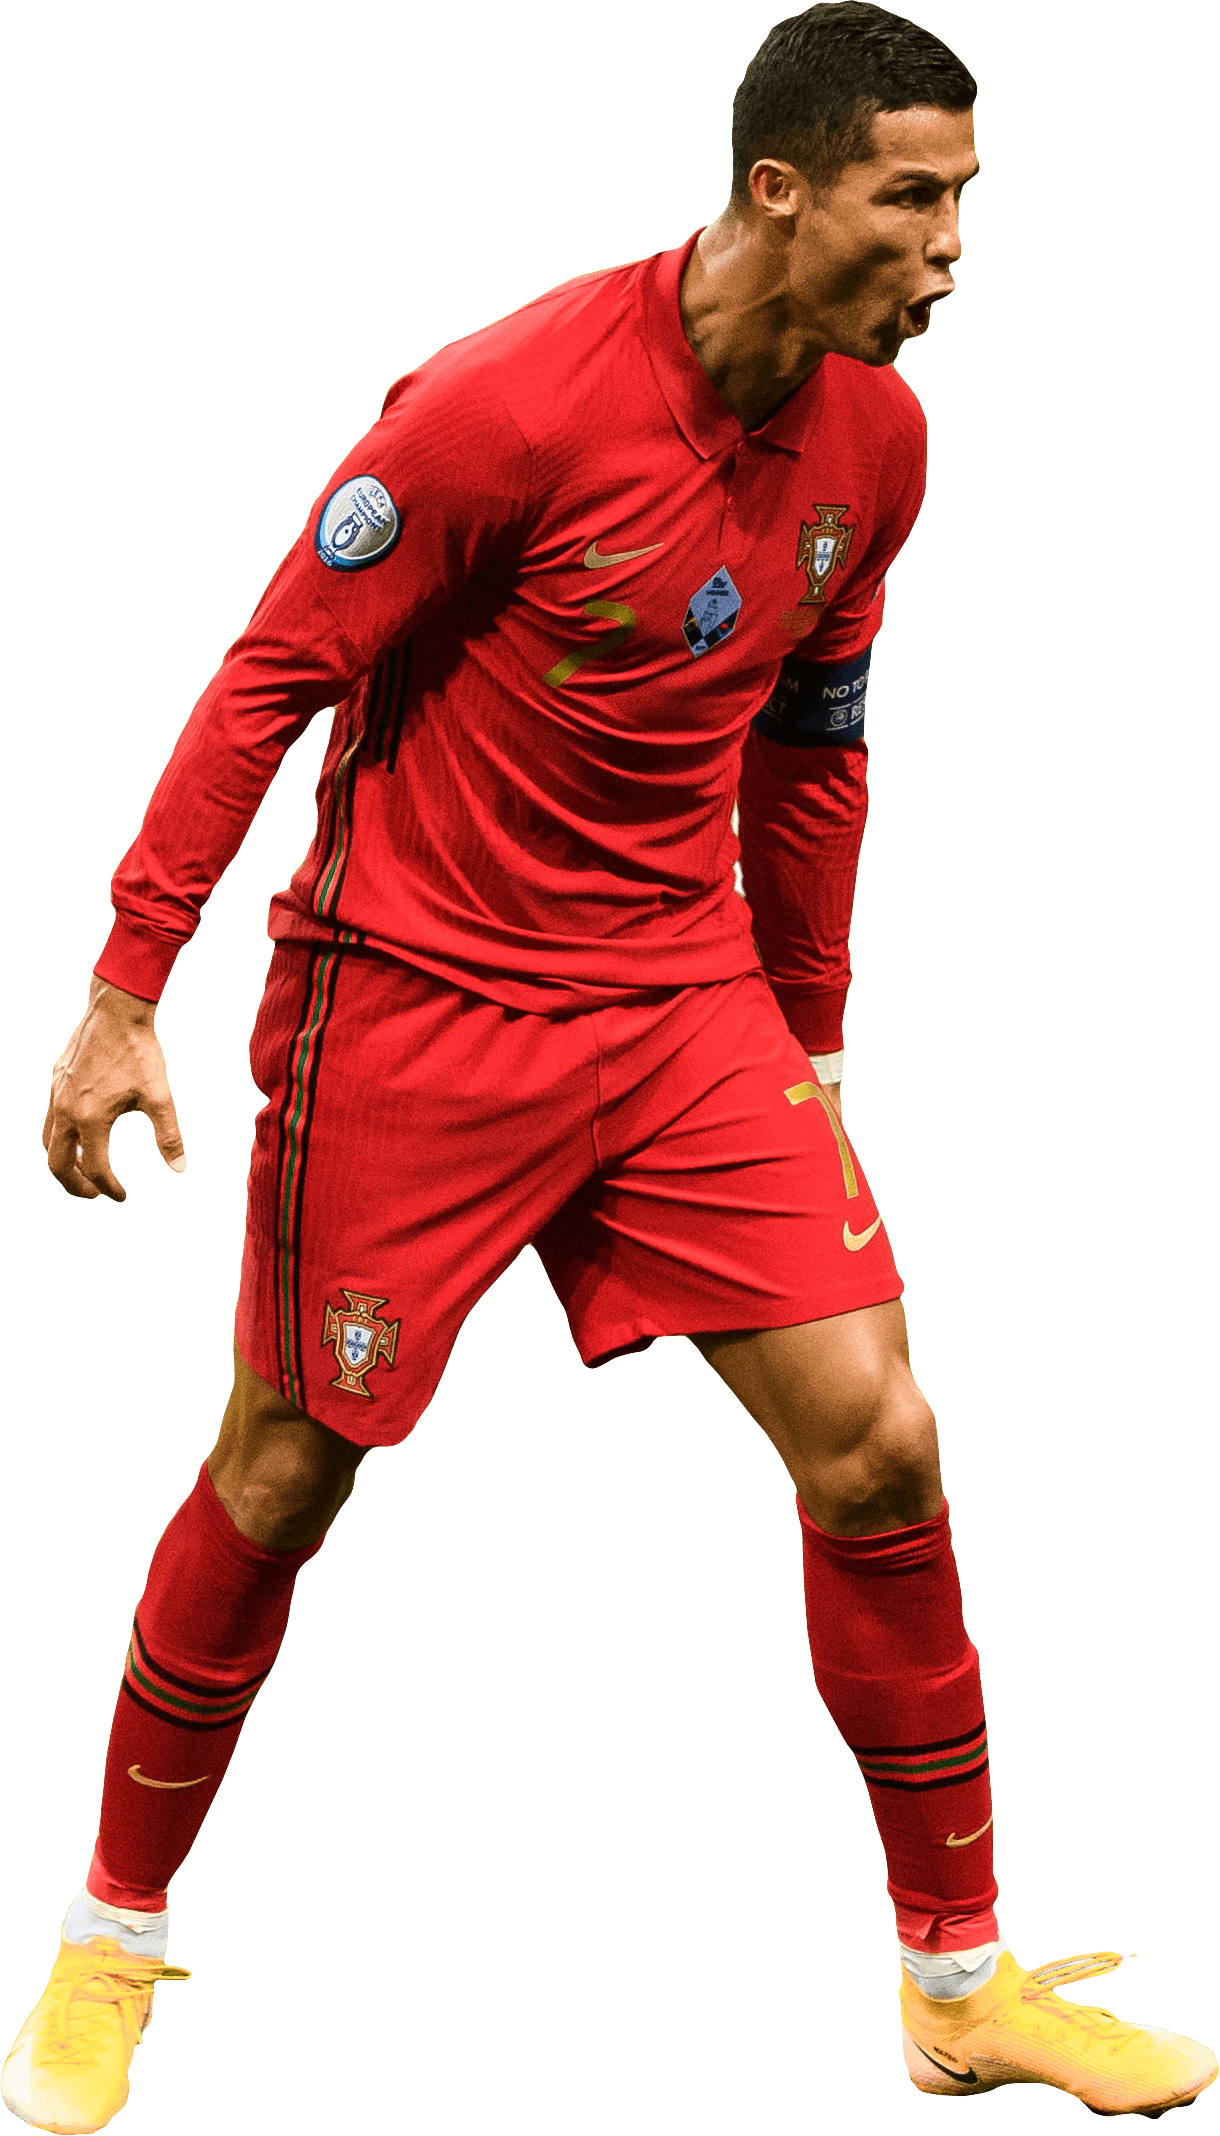 Cristiano Ronaldo Football Render 844 Footyrenders Images And Photos